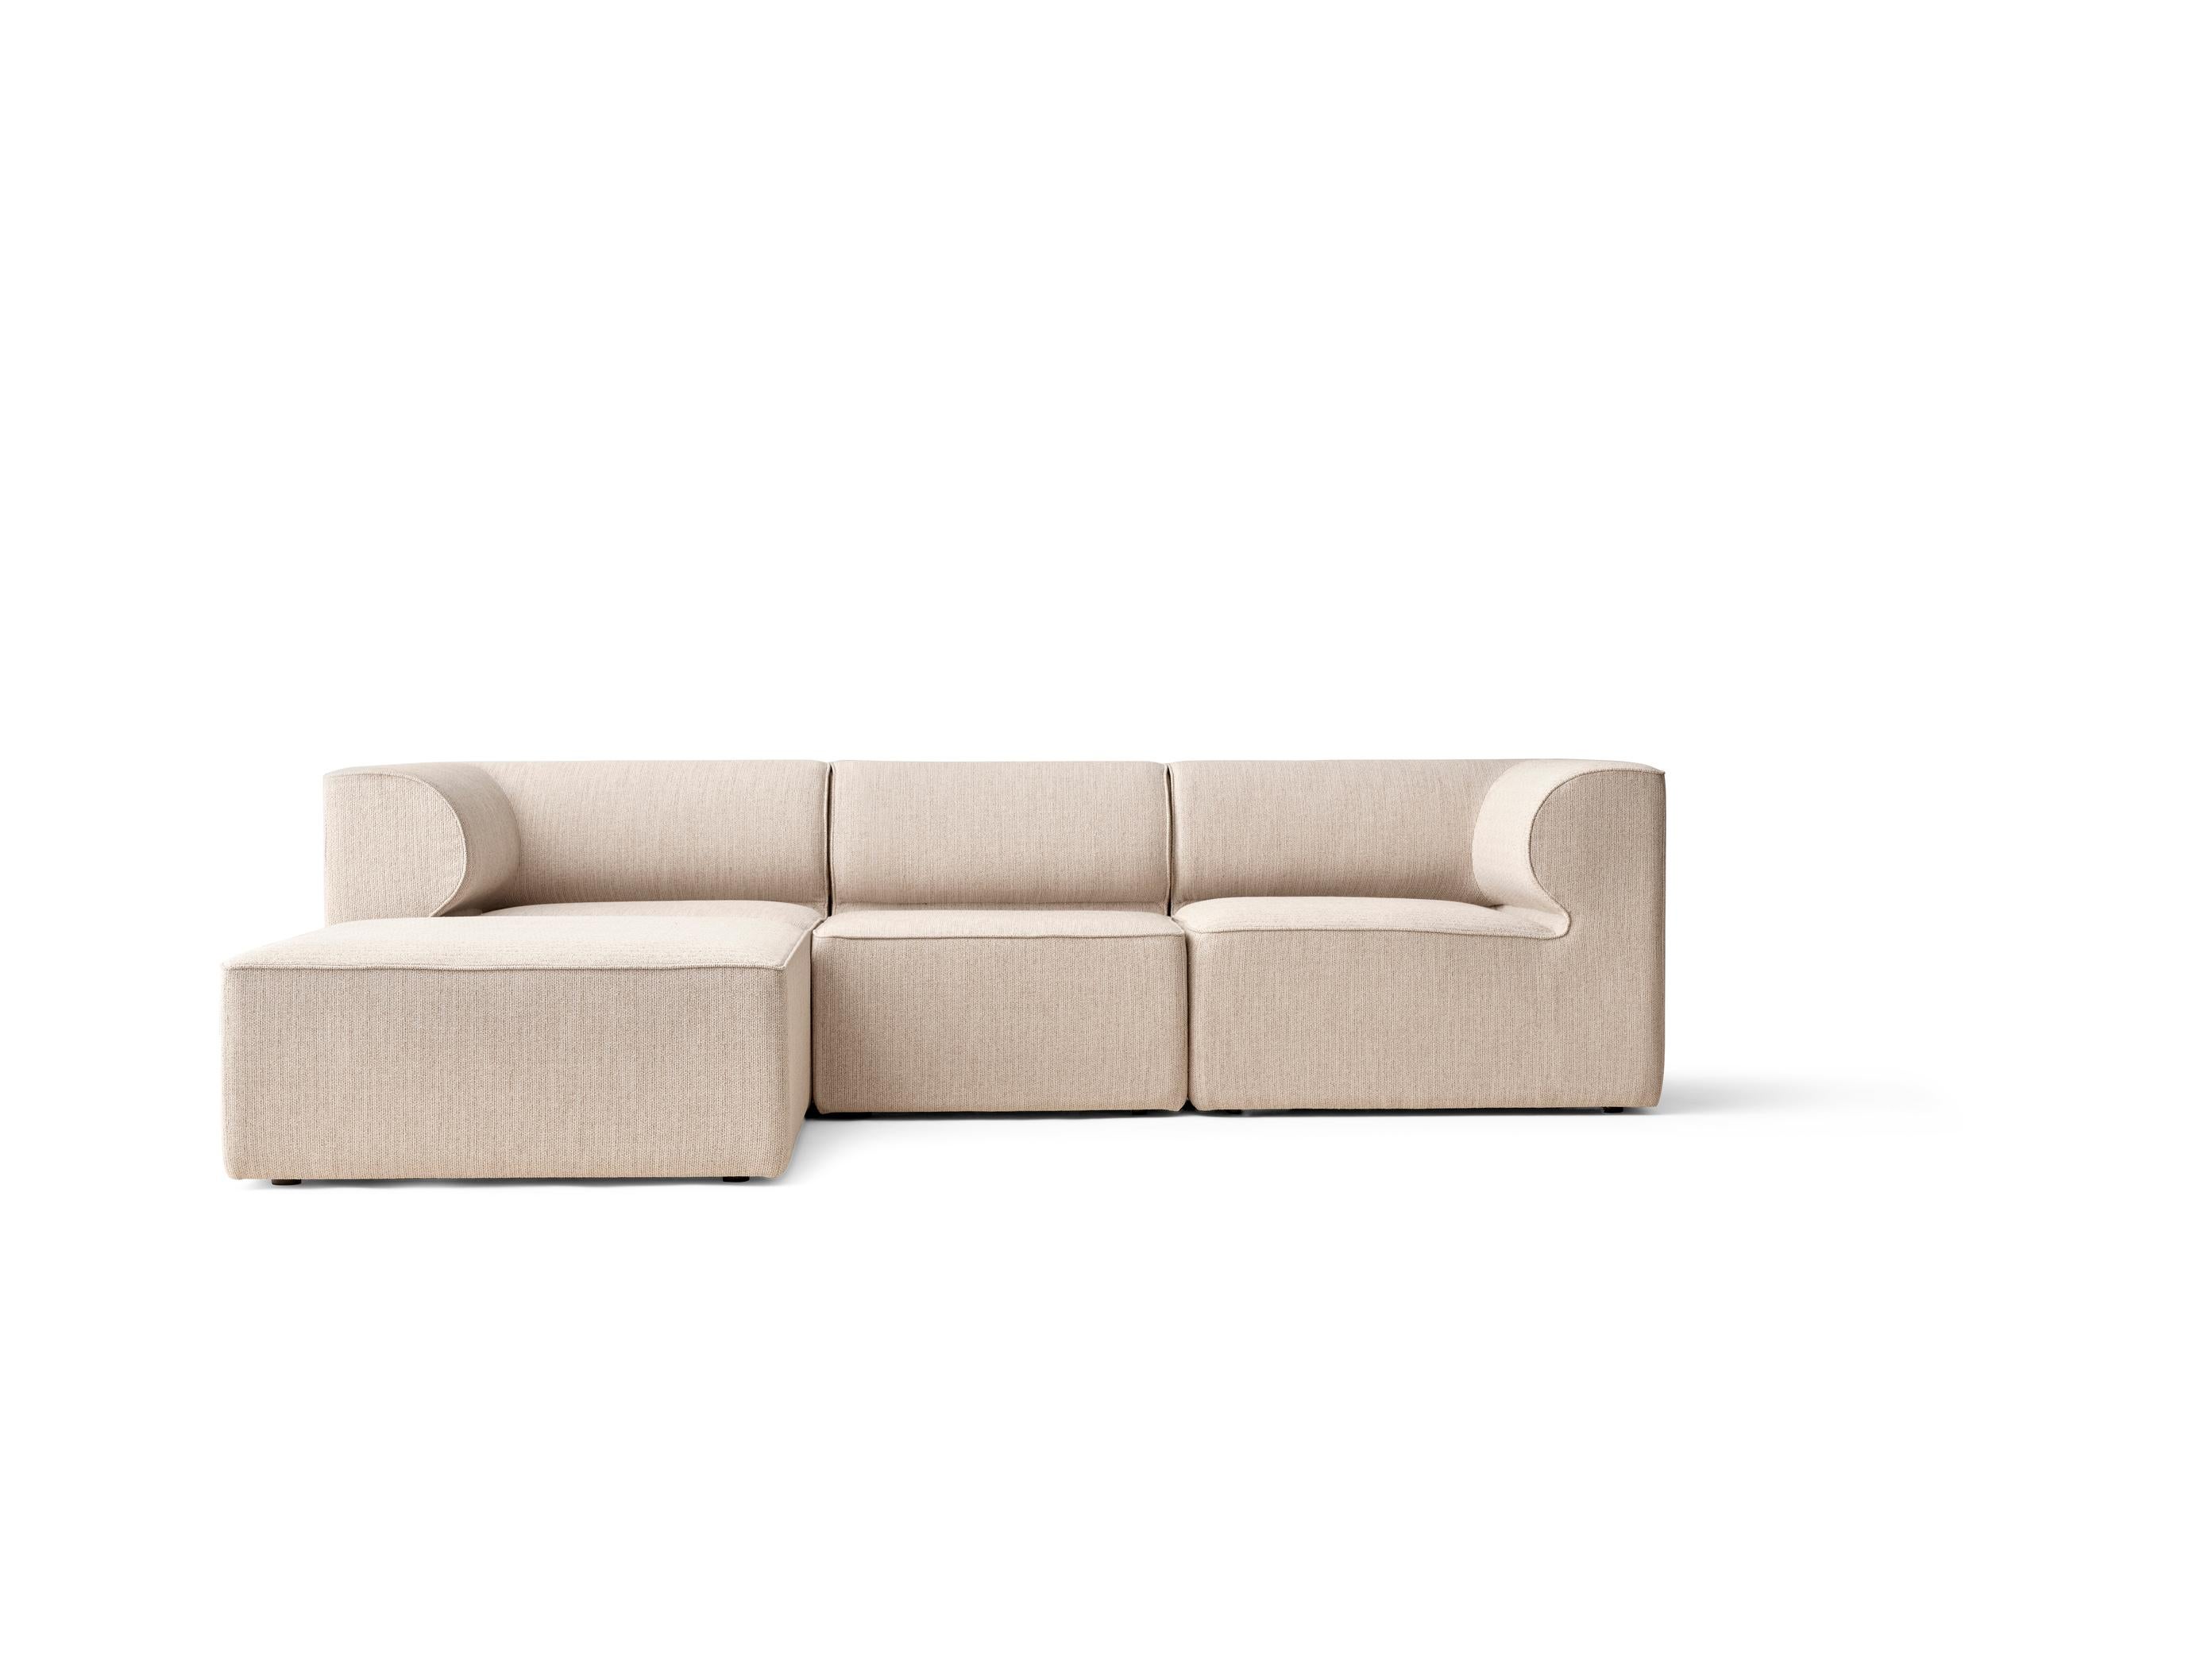 Inspired by architecture Eave Modular sofa takes its name from “eaves” – the lower edges of the roof that overhang a wall. The sofa’s distinctive detail is its internal “eaves” – curved upholstered armrests that lend the sofa its expressive